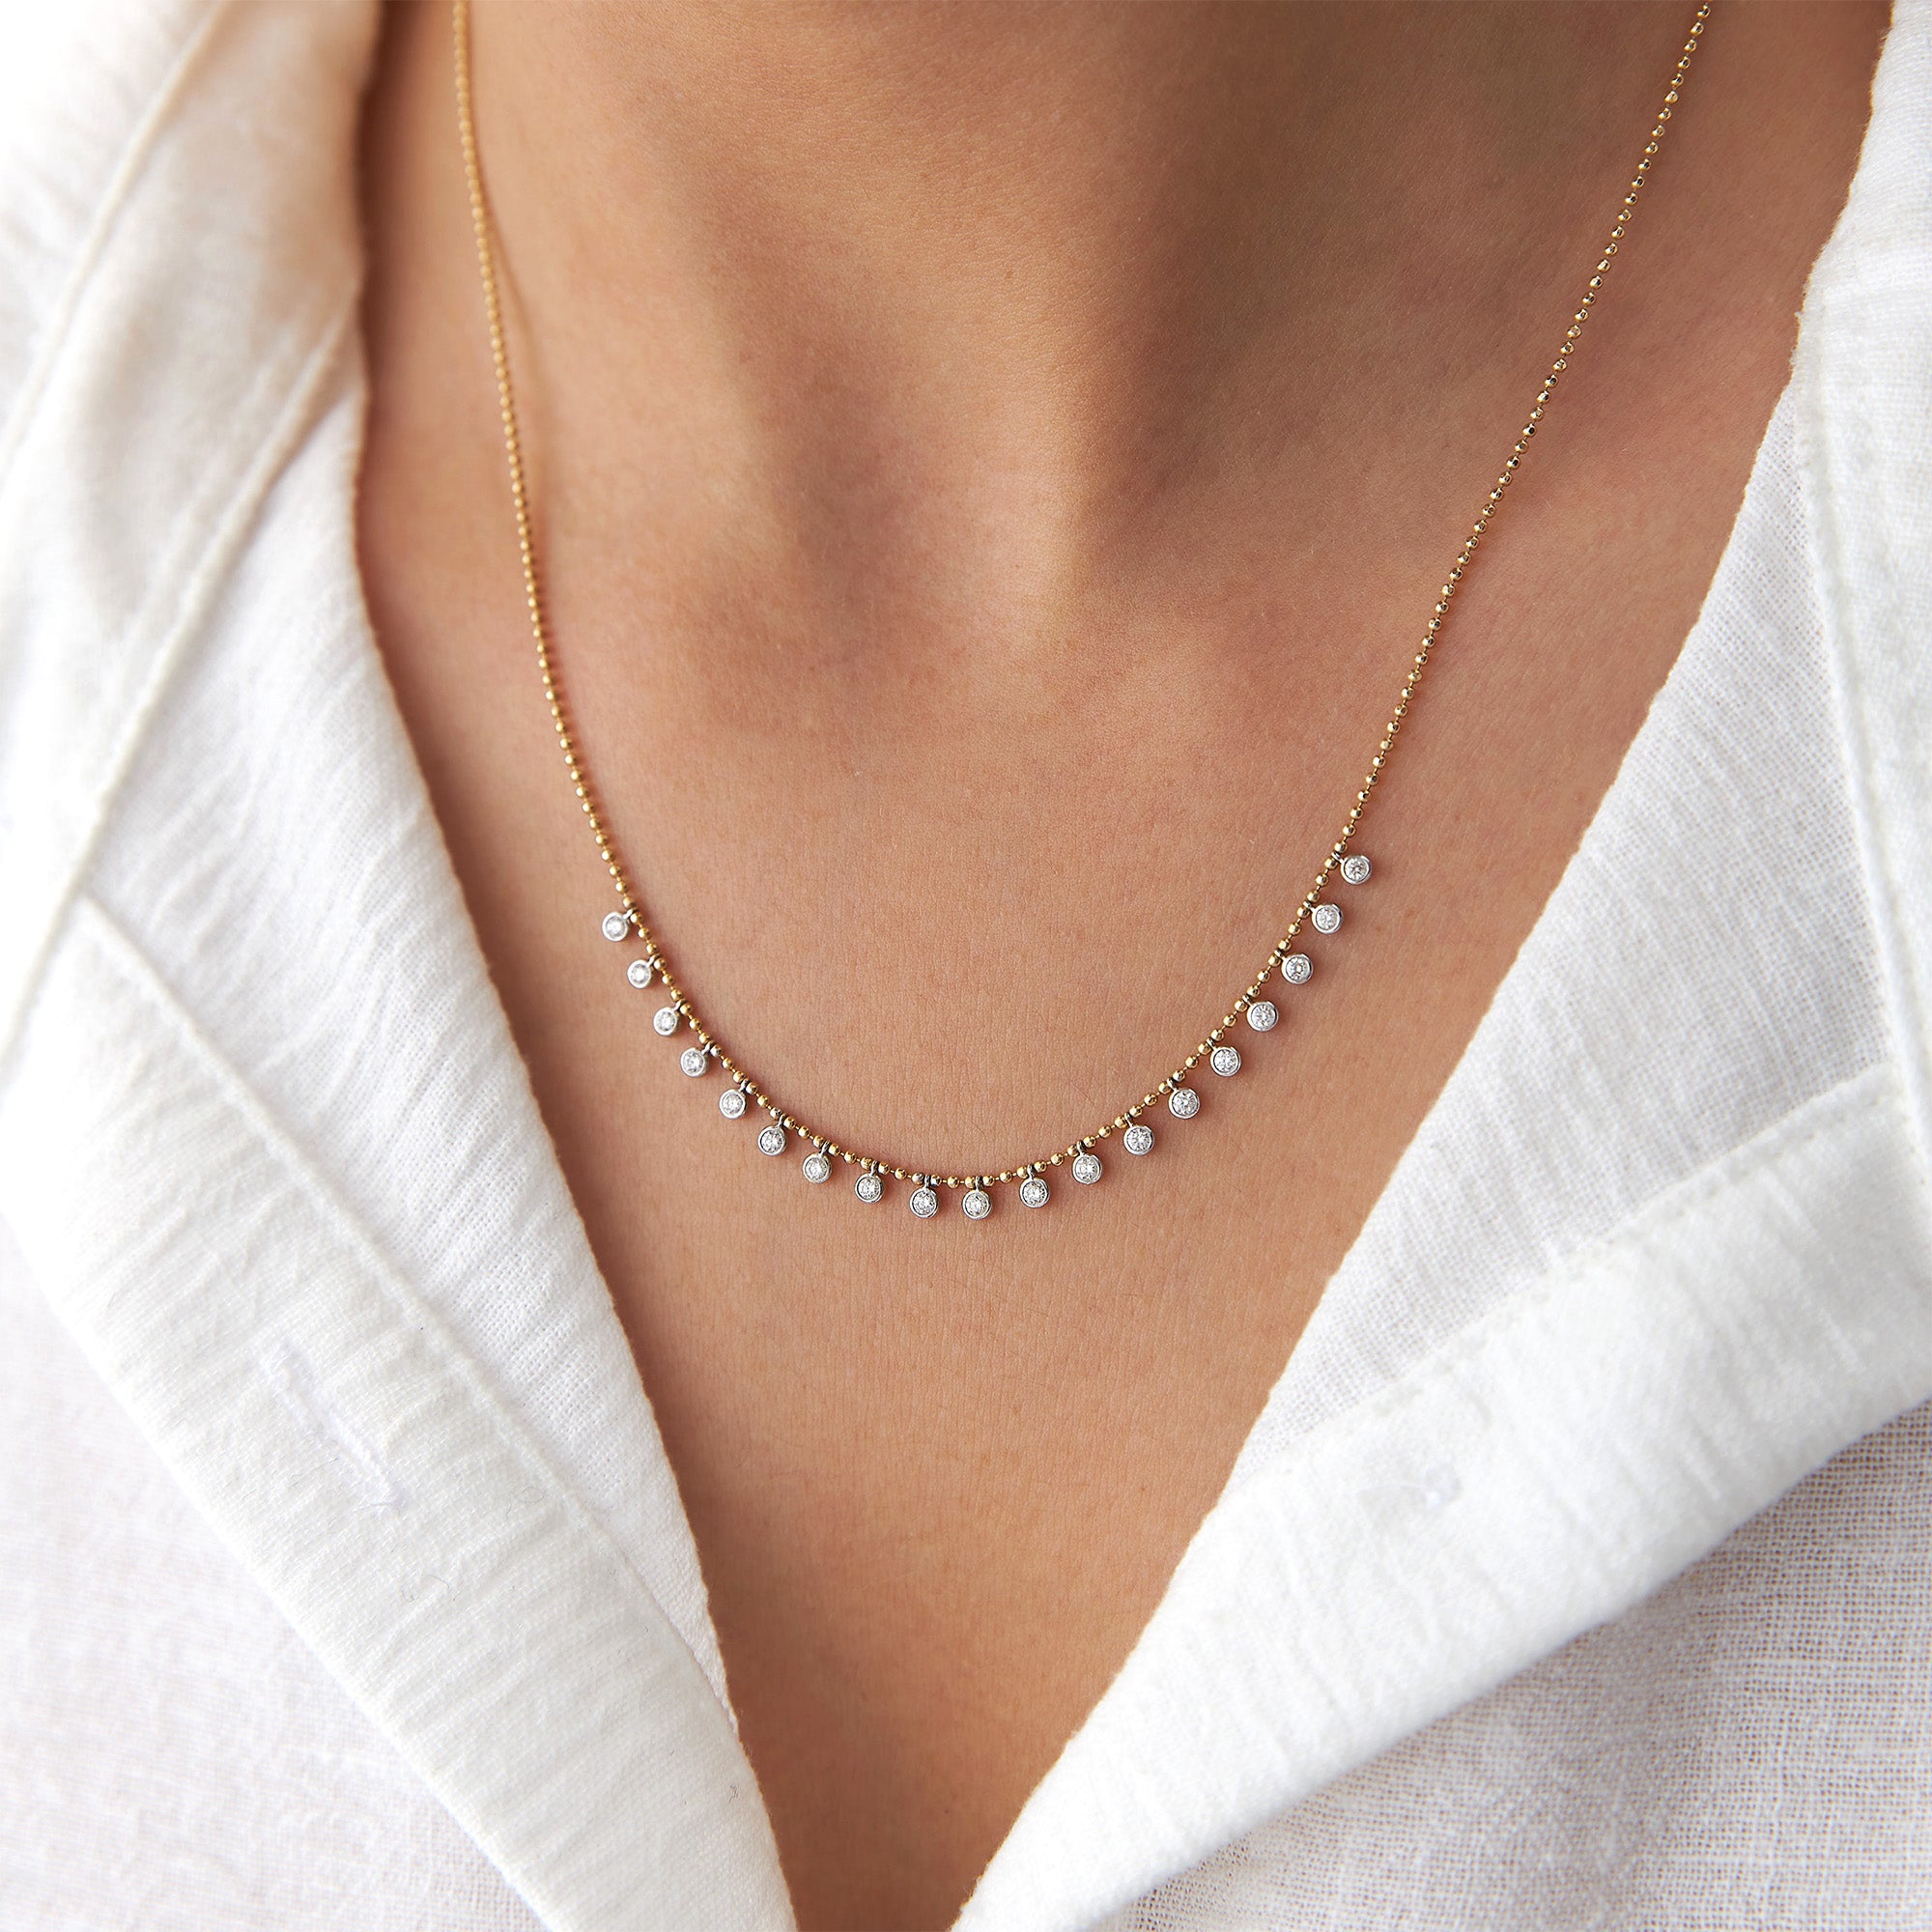 Ball Chain Diamond Necklace in 14K Gold